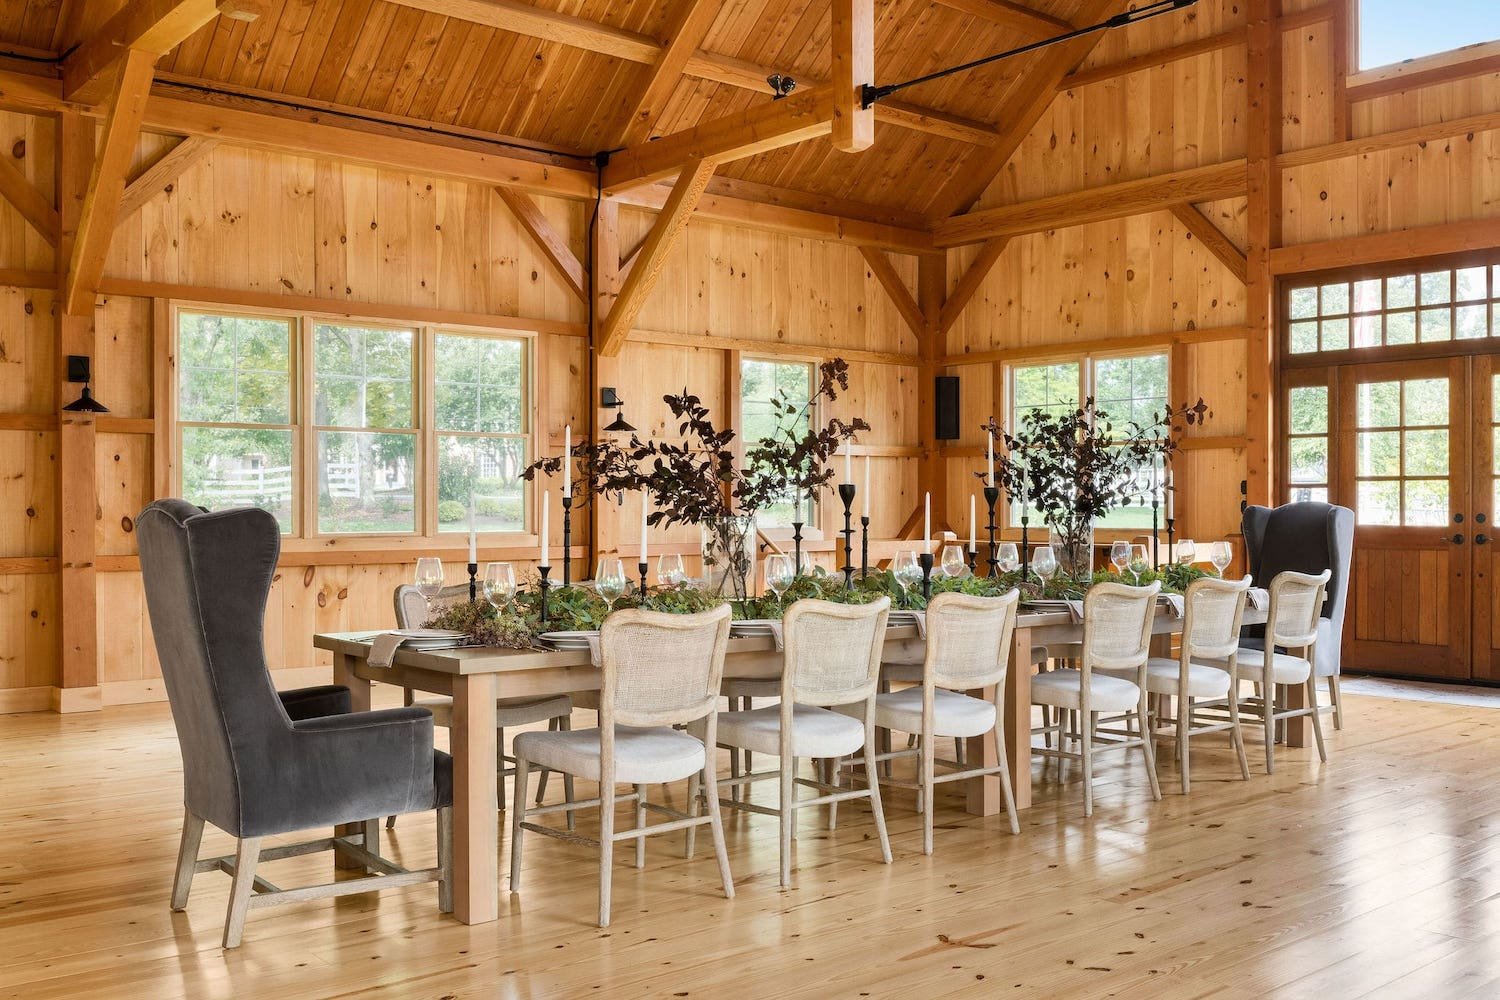 Beautiful interior inside a party barn in chester county pa design completed by Stephanie Kraus Designs